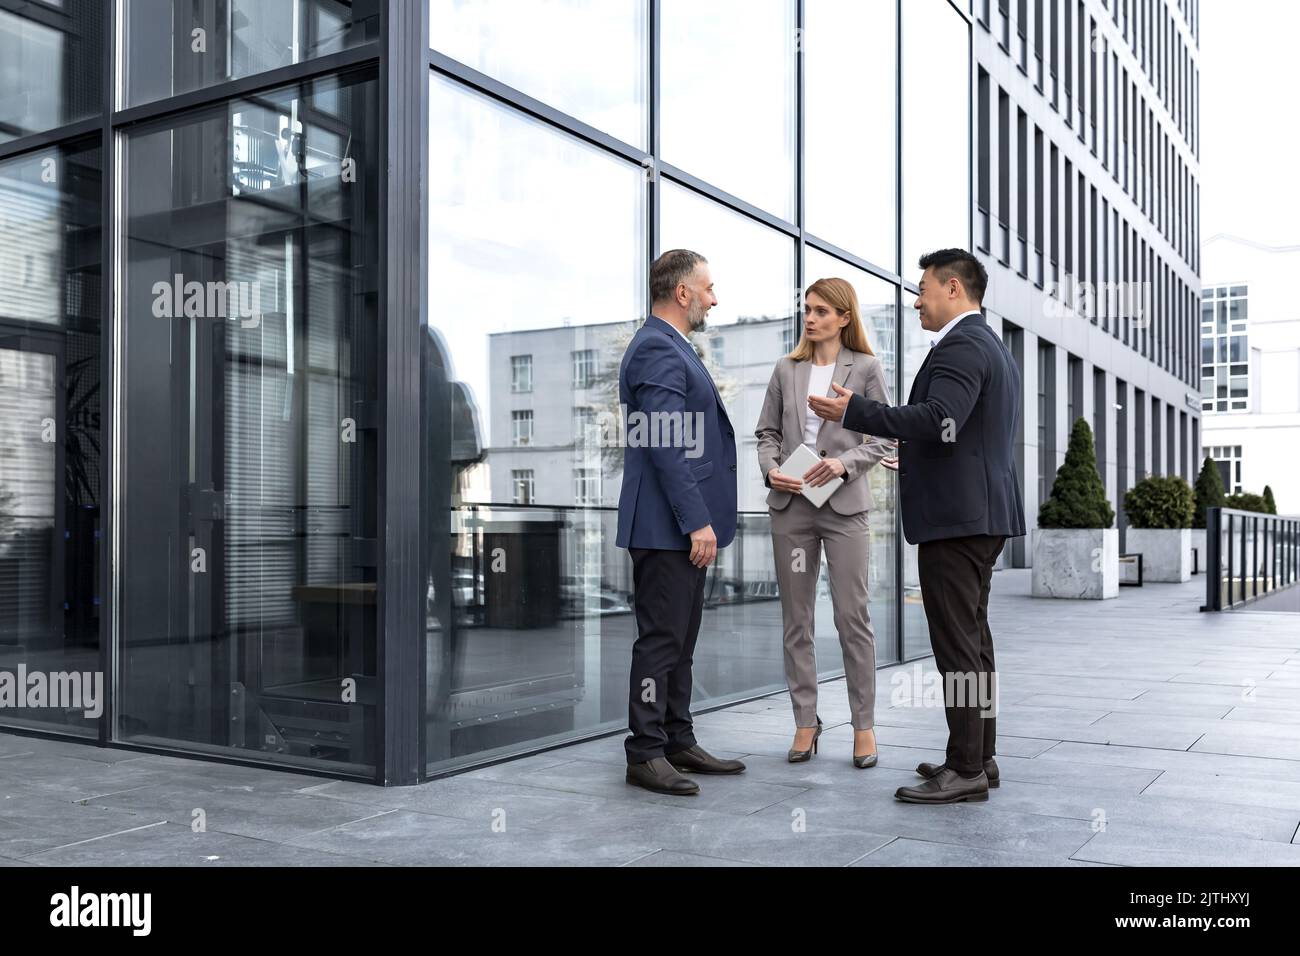 Meeting of three successful business people, diverse dream team man and woman outside office building, greeting and shaking hands, experienced professionals specialists in business suits talking Stock Photo